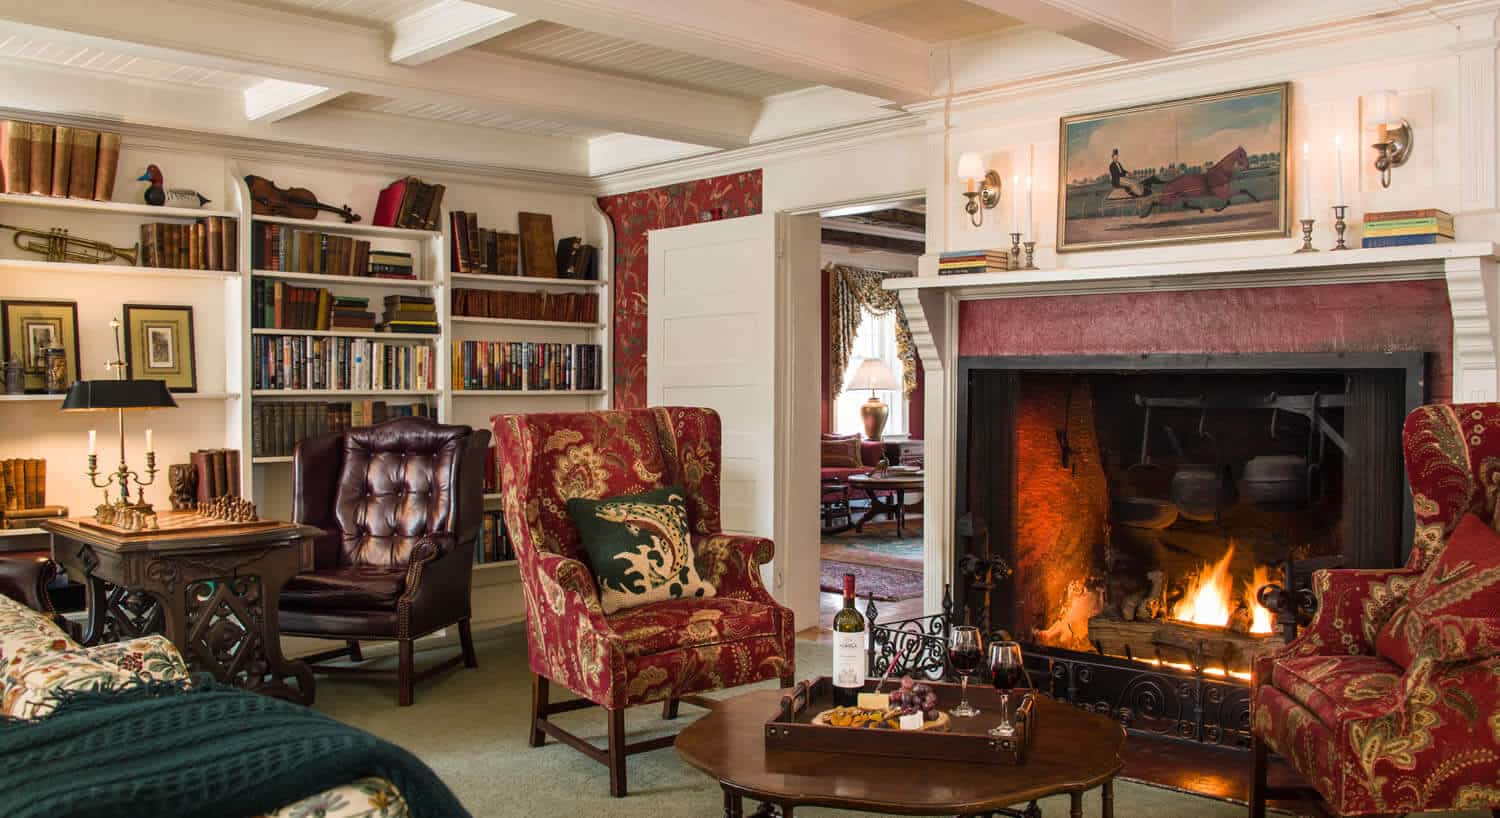 Inn at Ormsby Hill - Common Room with Fireplace